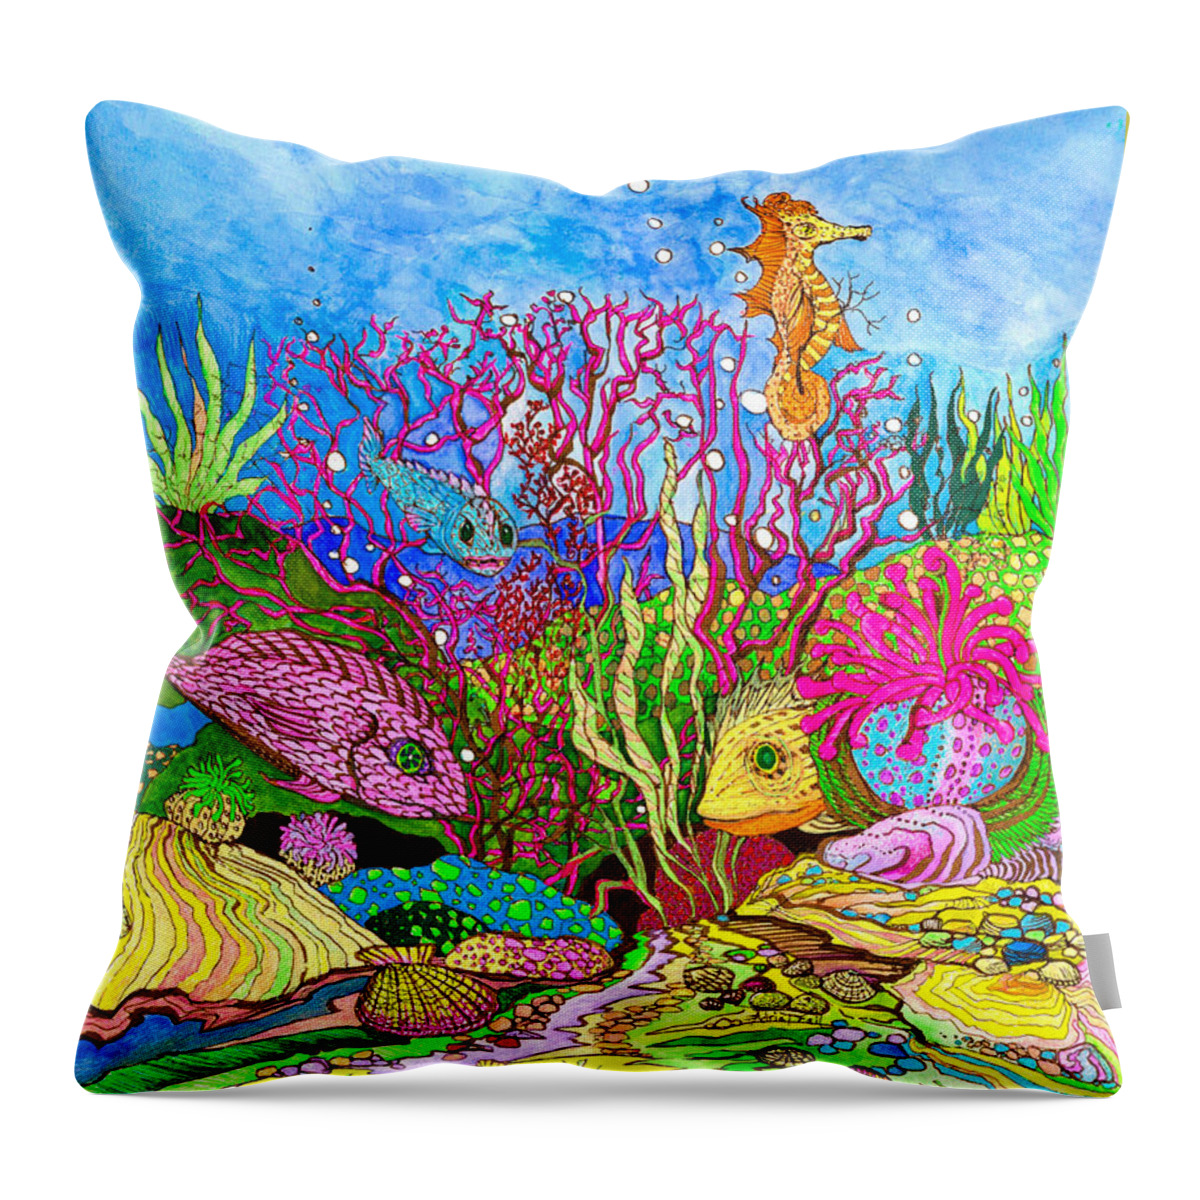 Adria Trail Throw Pillow featuring the painting Neon Sea by Adria Trail